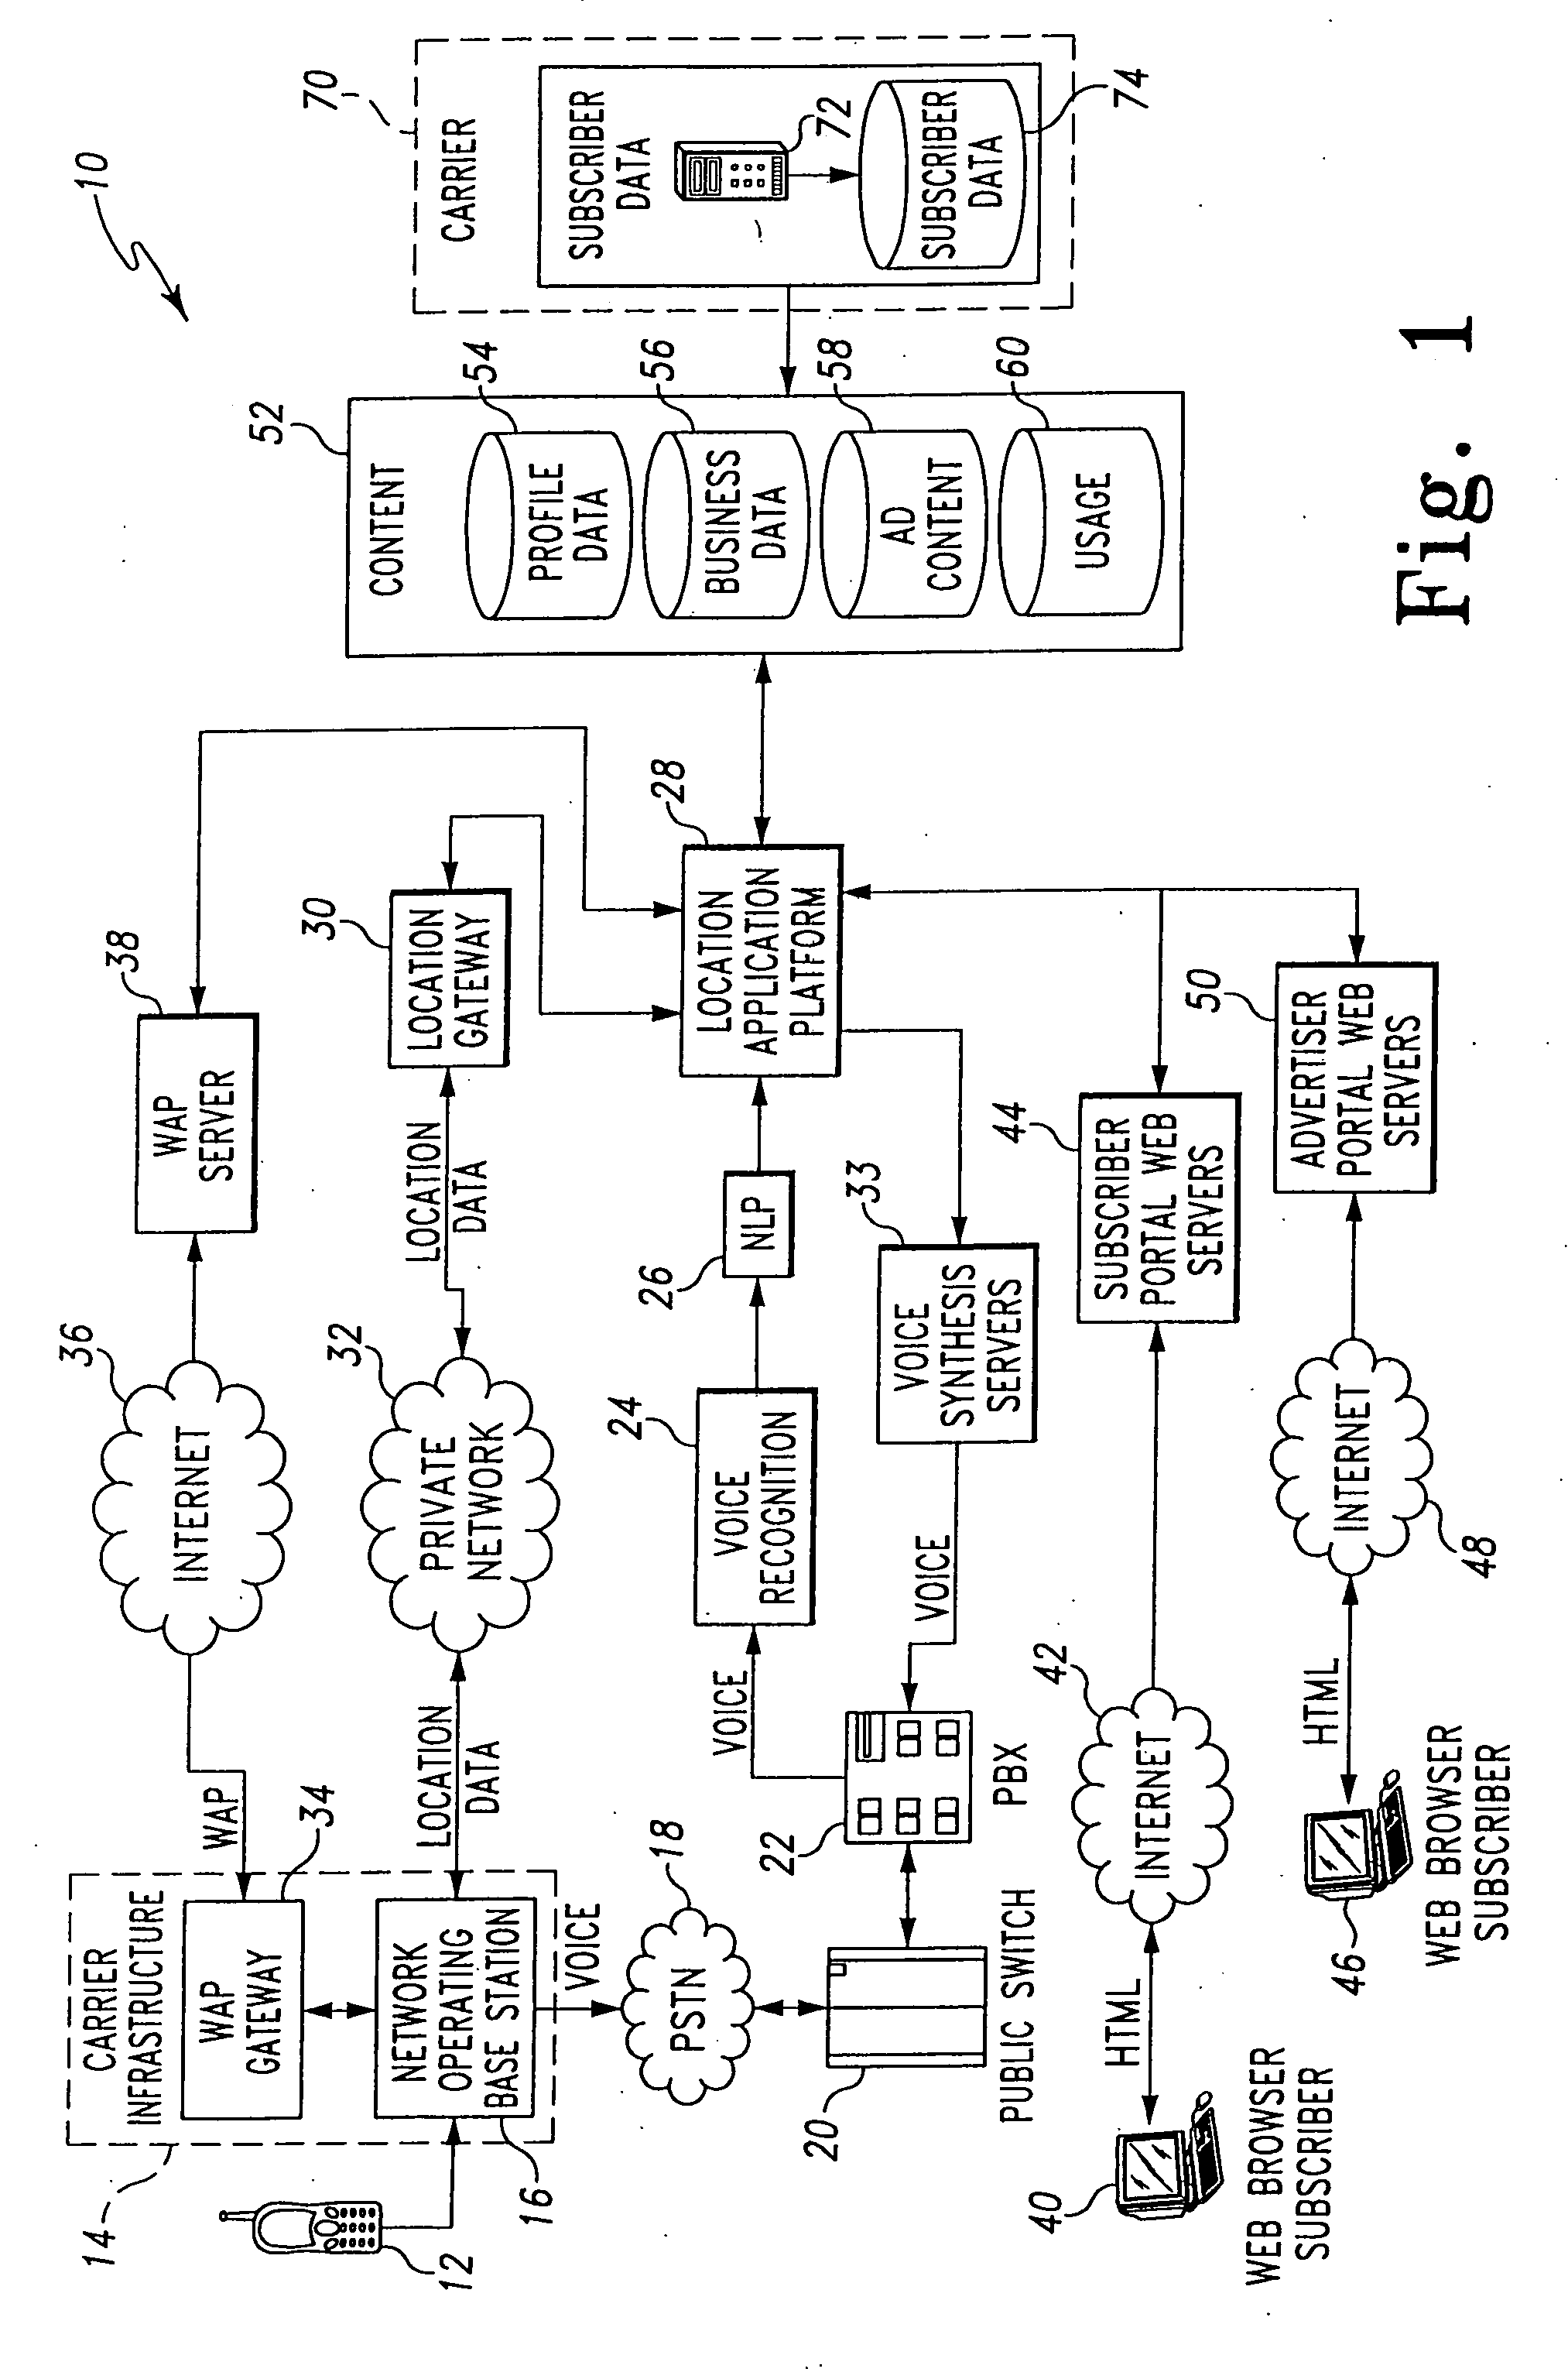 Method for passive mining of usage information in a location-based services system